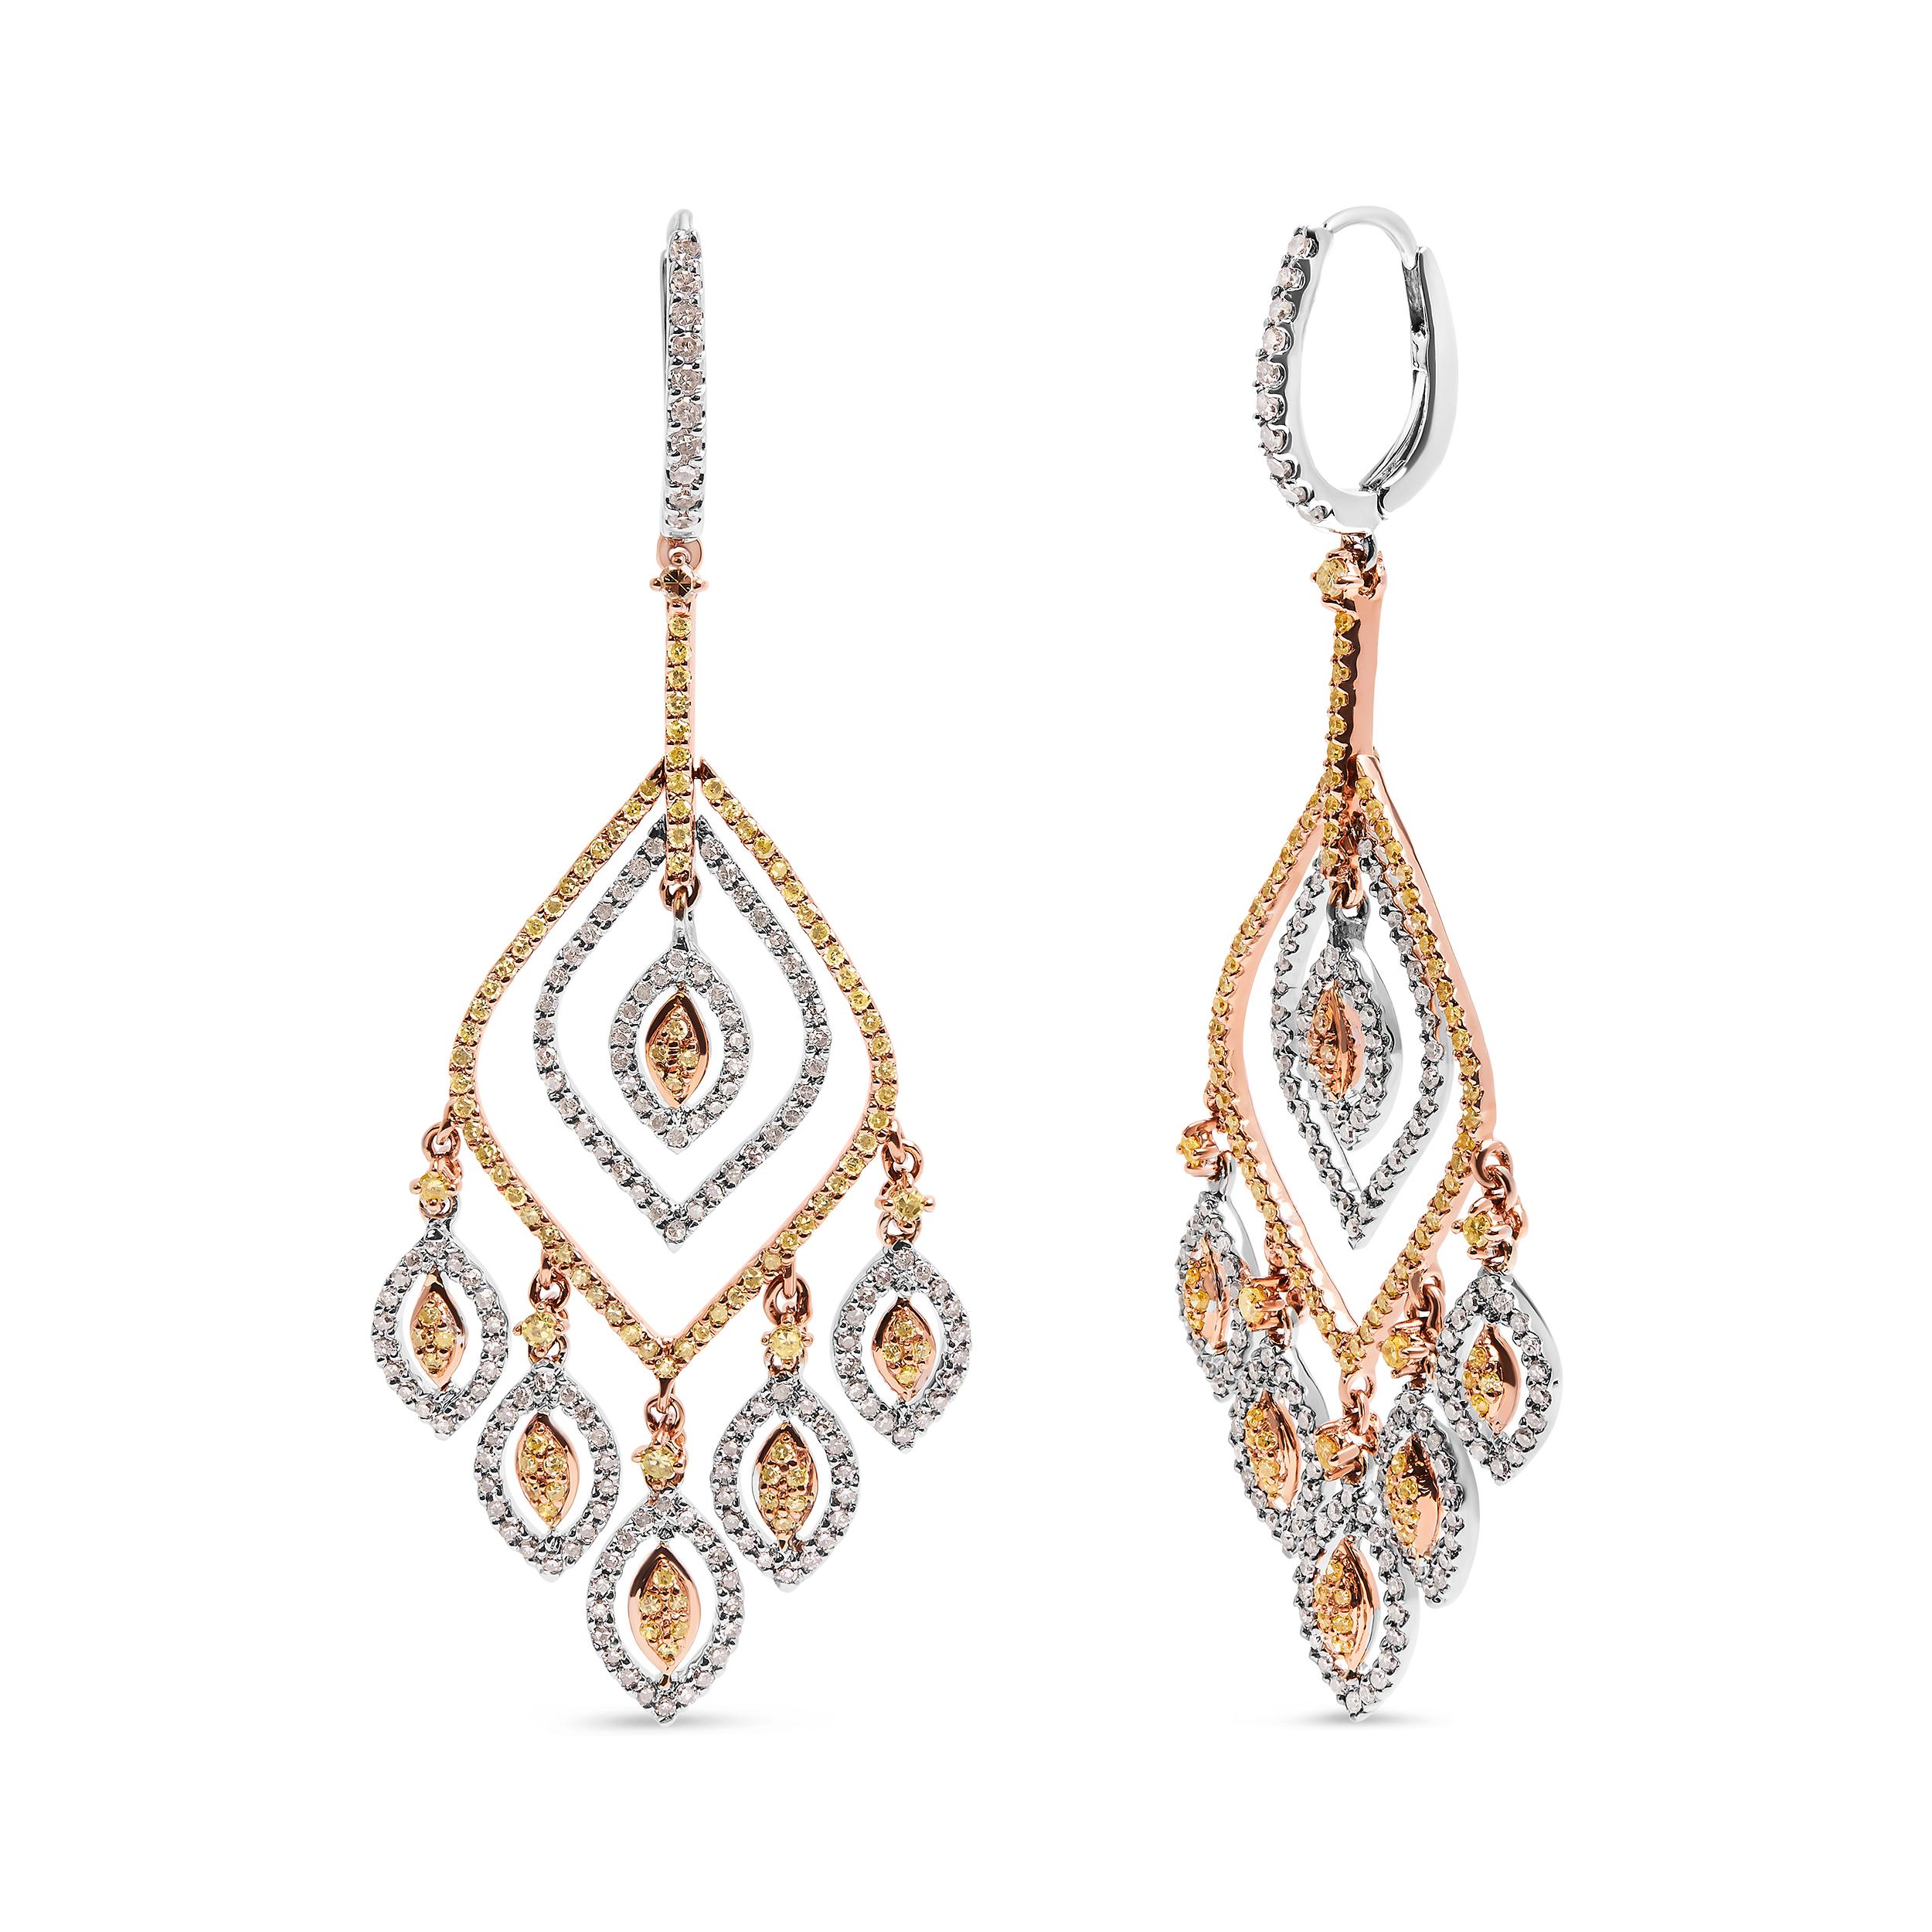 Introducing a dazzling masterpiece that will leave you breathless! These exquisite 14K White and Rose Gold Diamond Earrings boast a remarkable 2 1/2 carat total weight, adorned with a staggering 516 round diamonds. Crafted with precision and